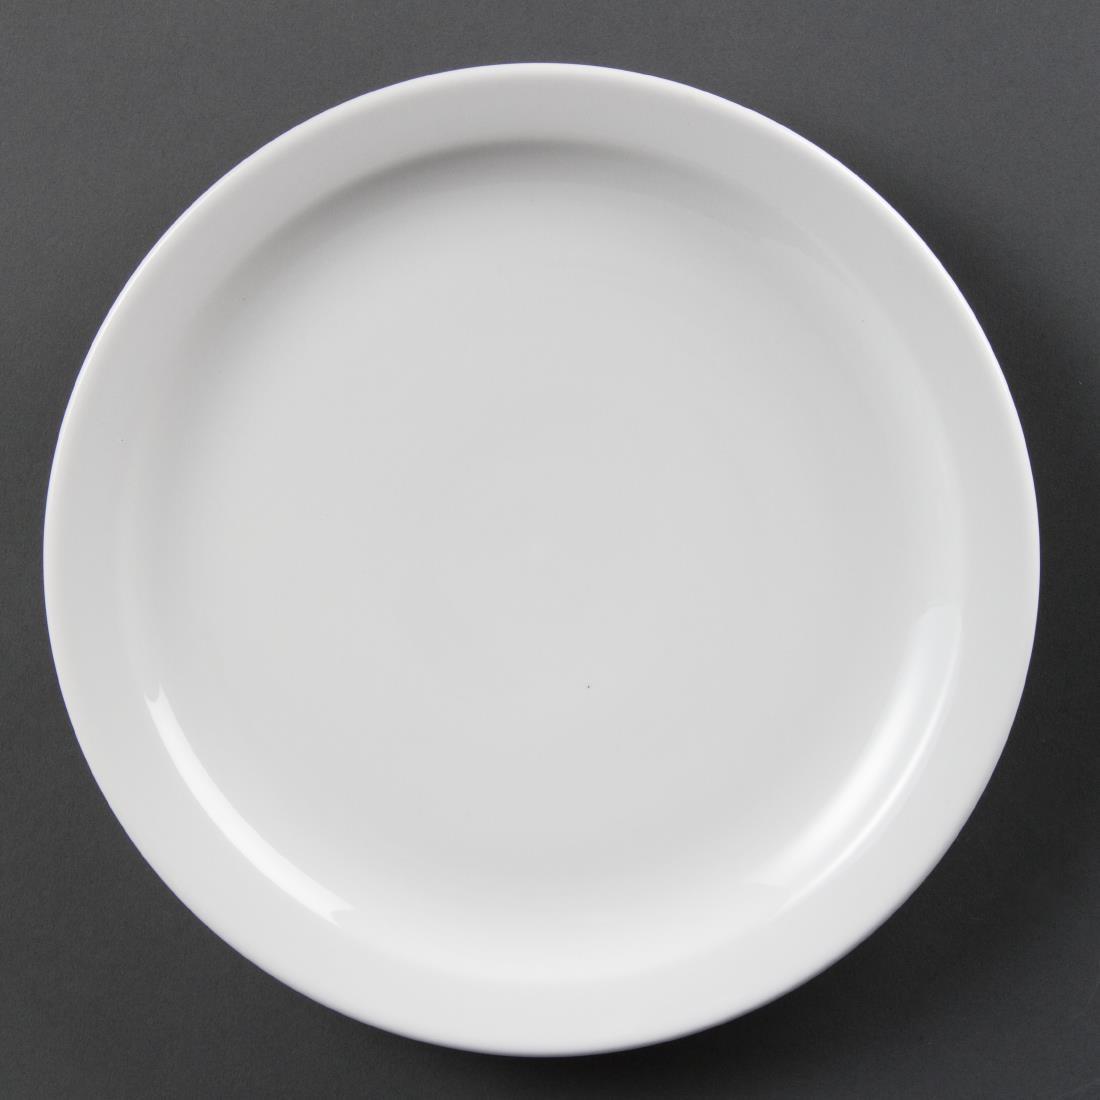 Olympia Whiteware Narrow Rimmed Plates 250mm (Pack of 12) - CB490  - 1